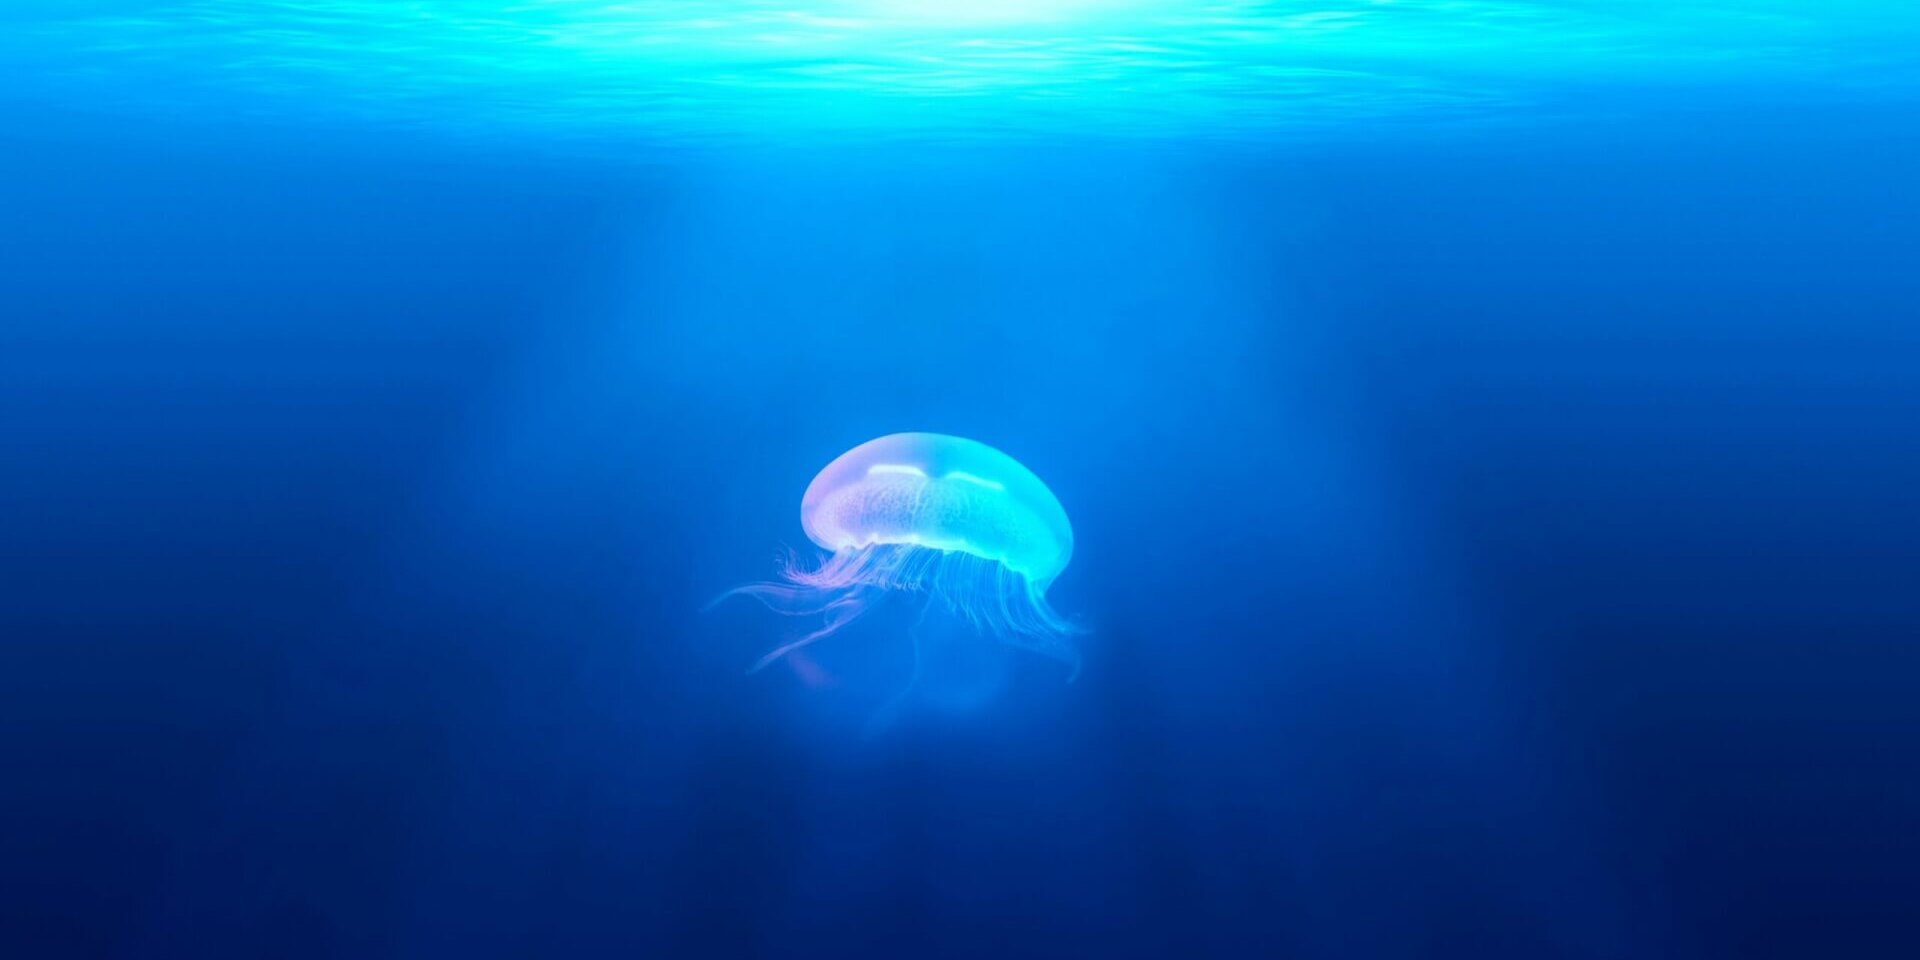 A colourful Jellyfish floating in the ocean with light shining from above the water